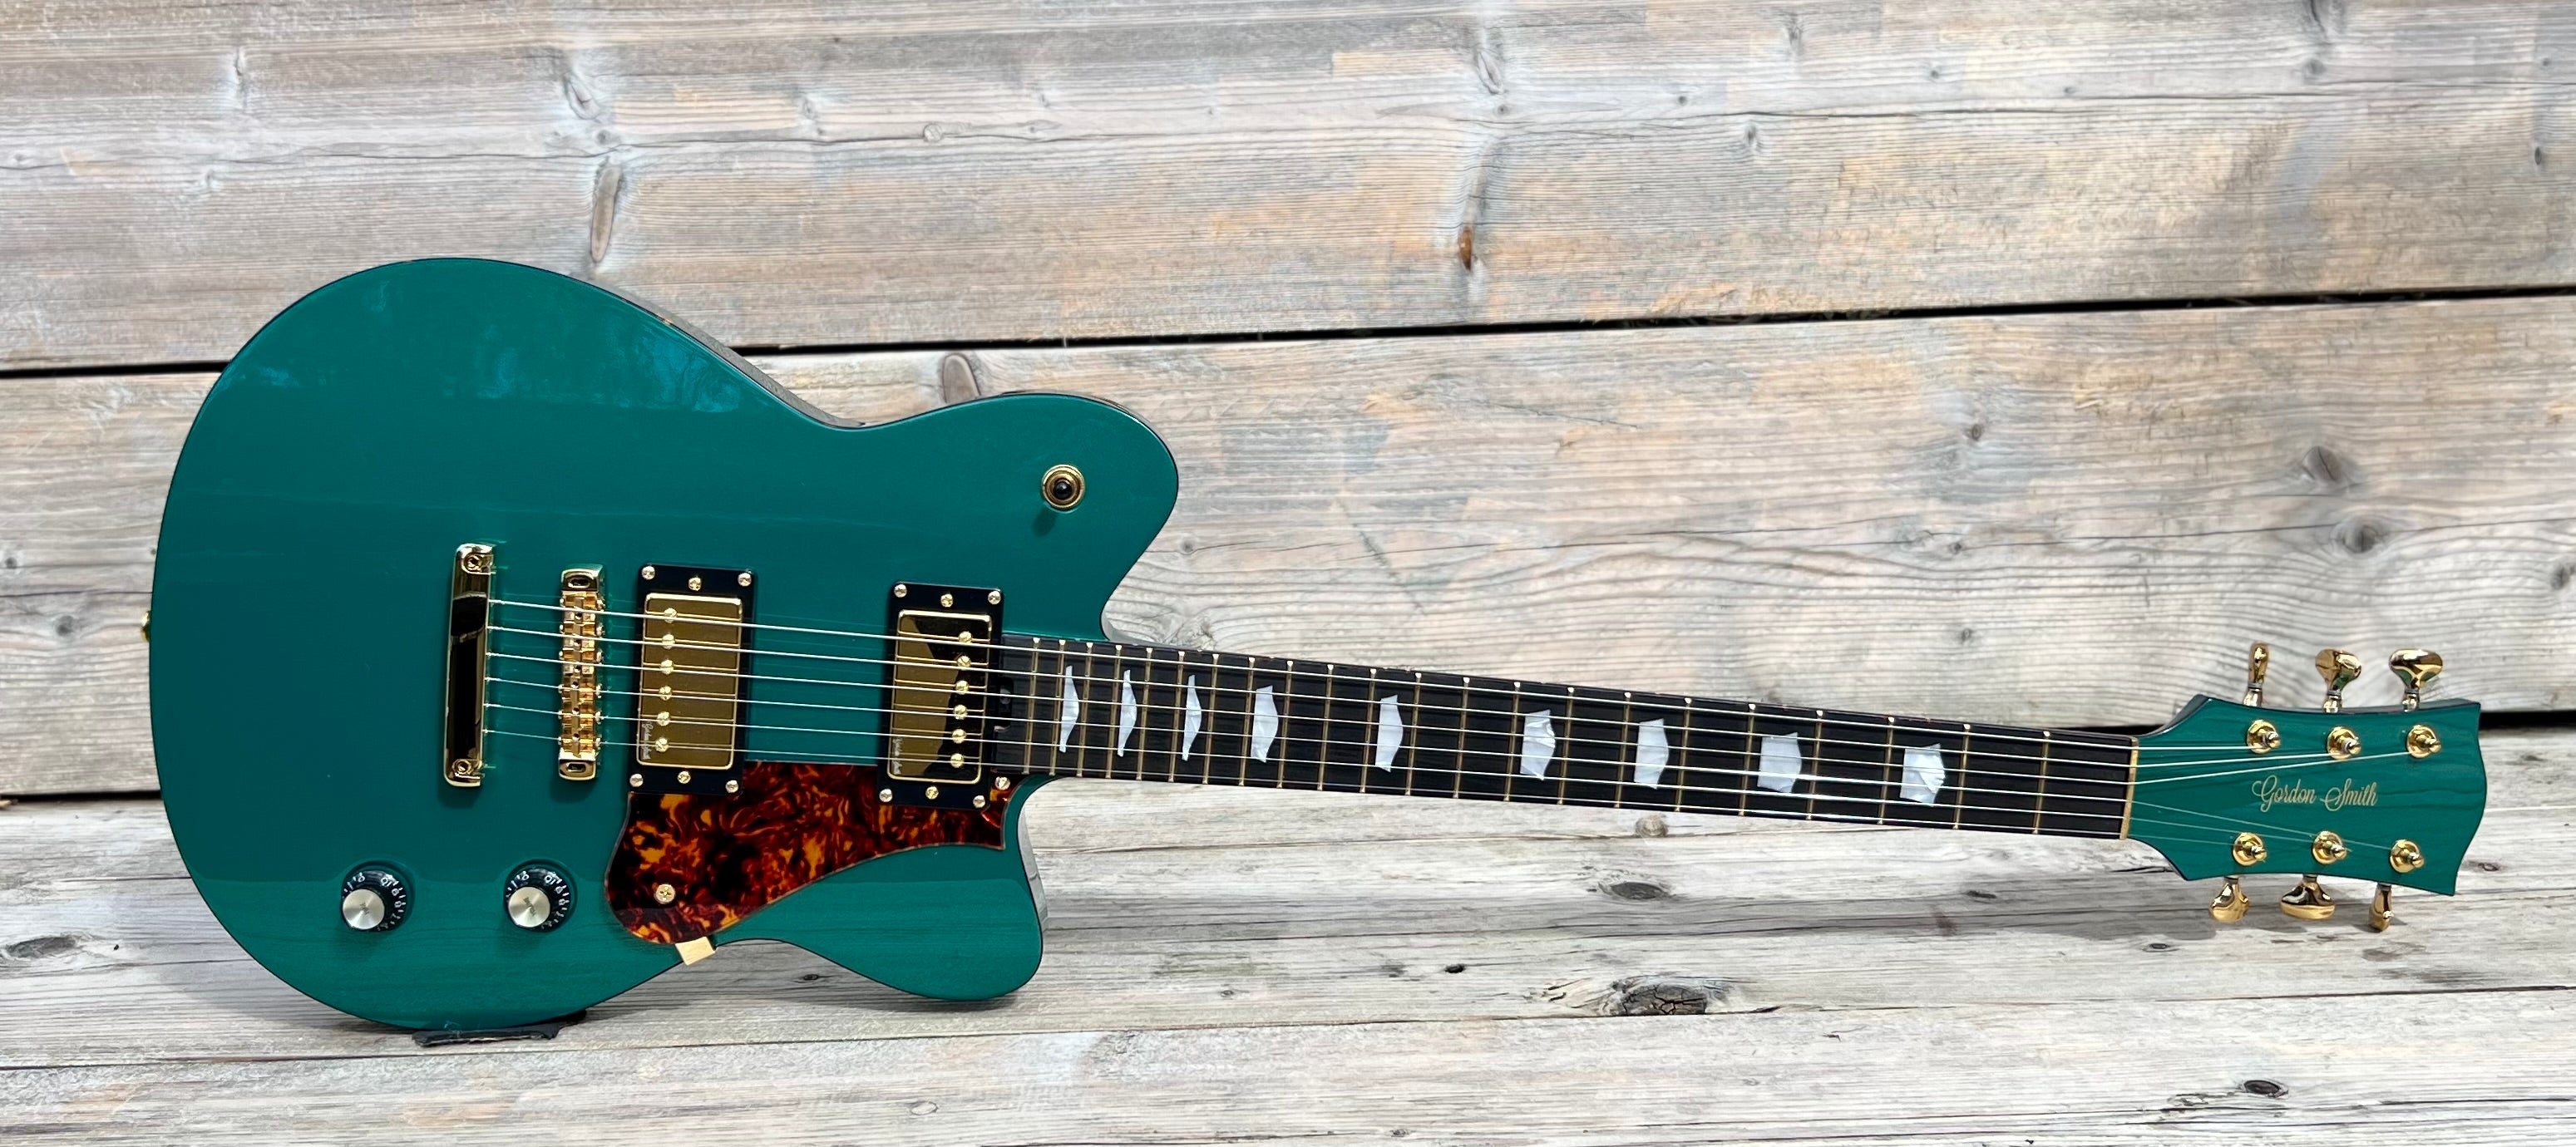 Gordon Smith Grande (Green) Plus Hand Made Walsall Leather Guitar Strap (Worth £120), Electric Guitar for sale at Richards Guitars.